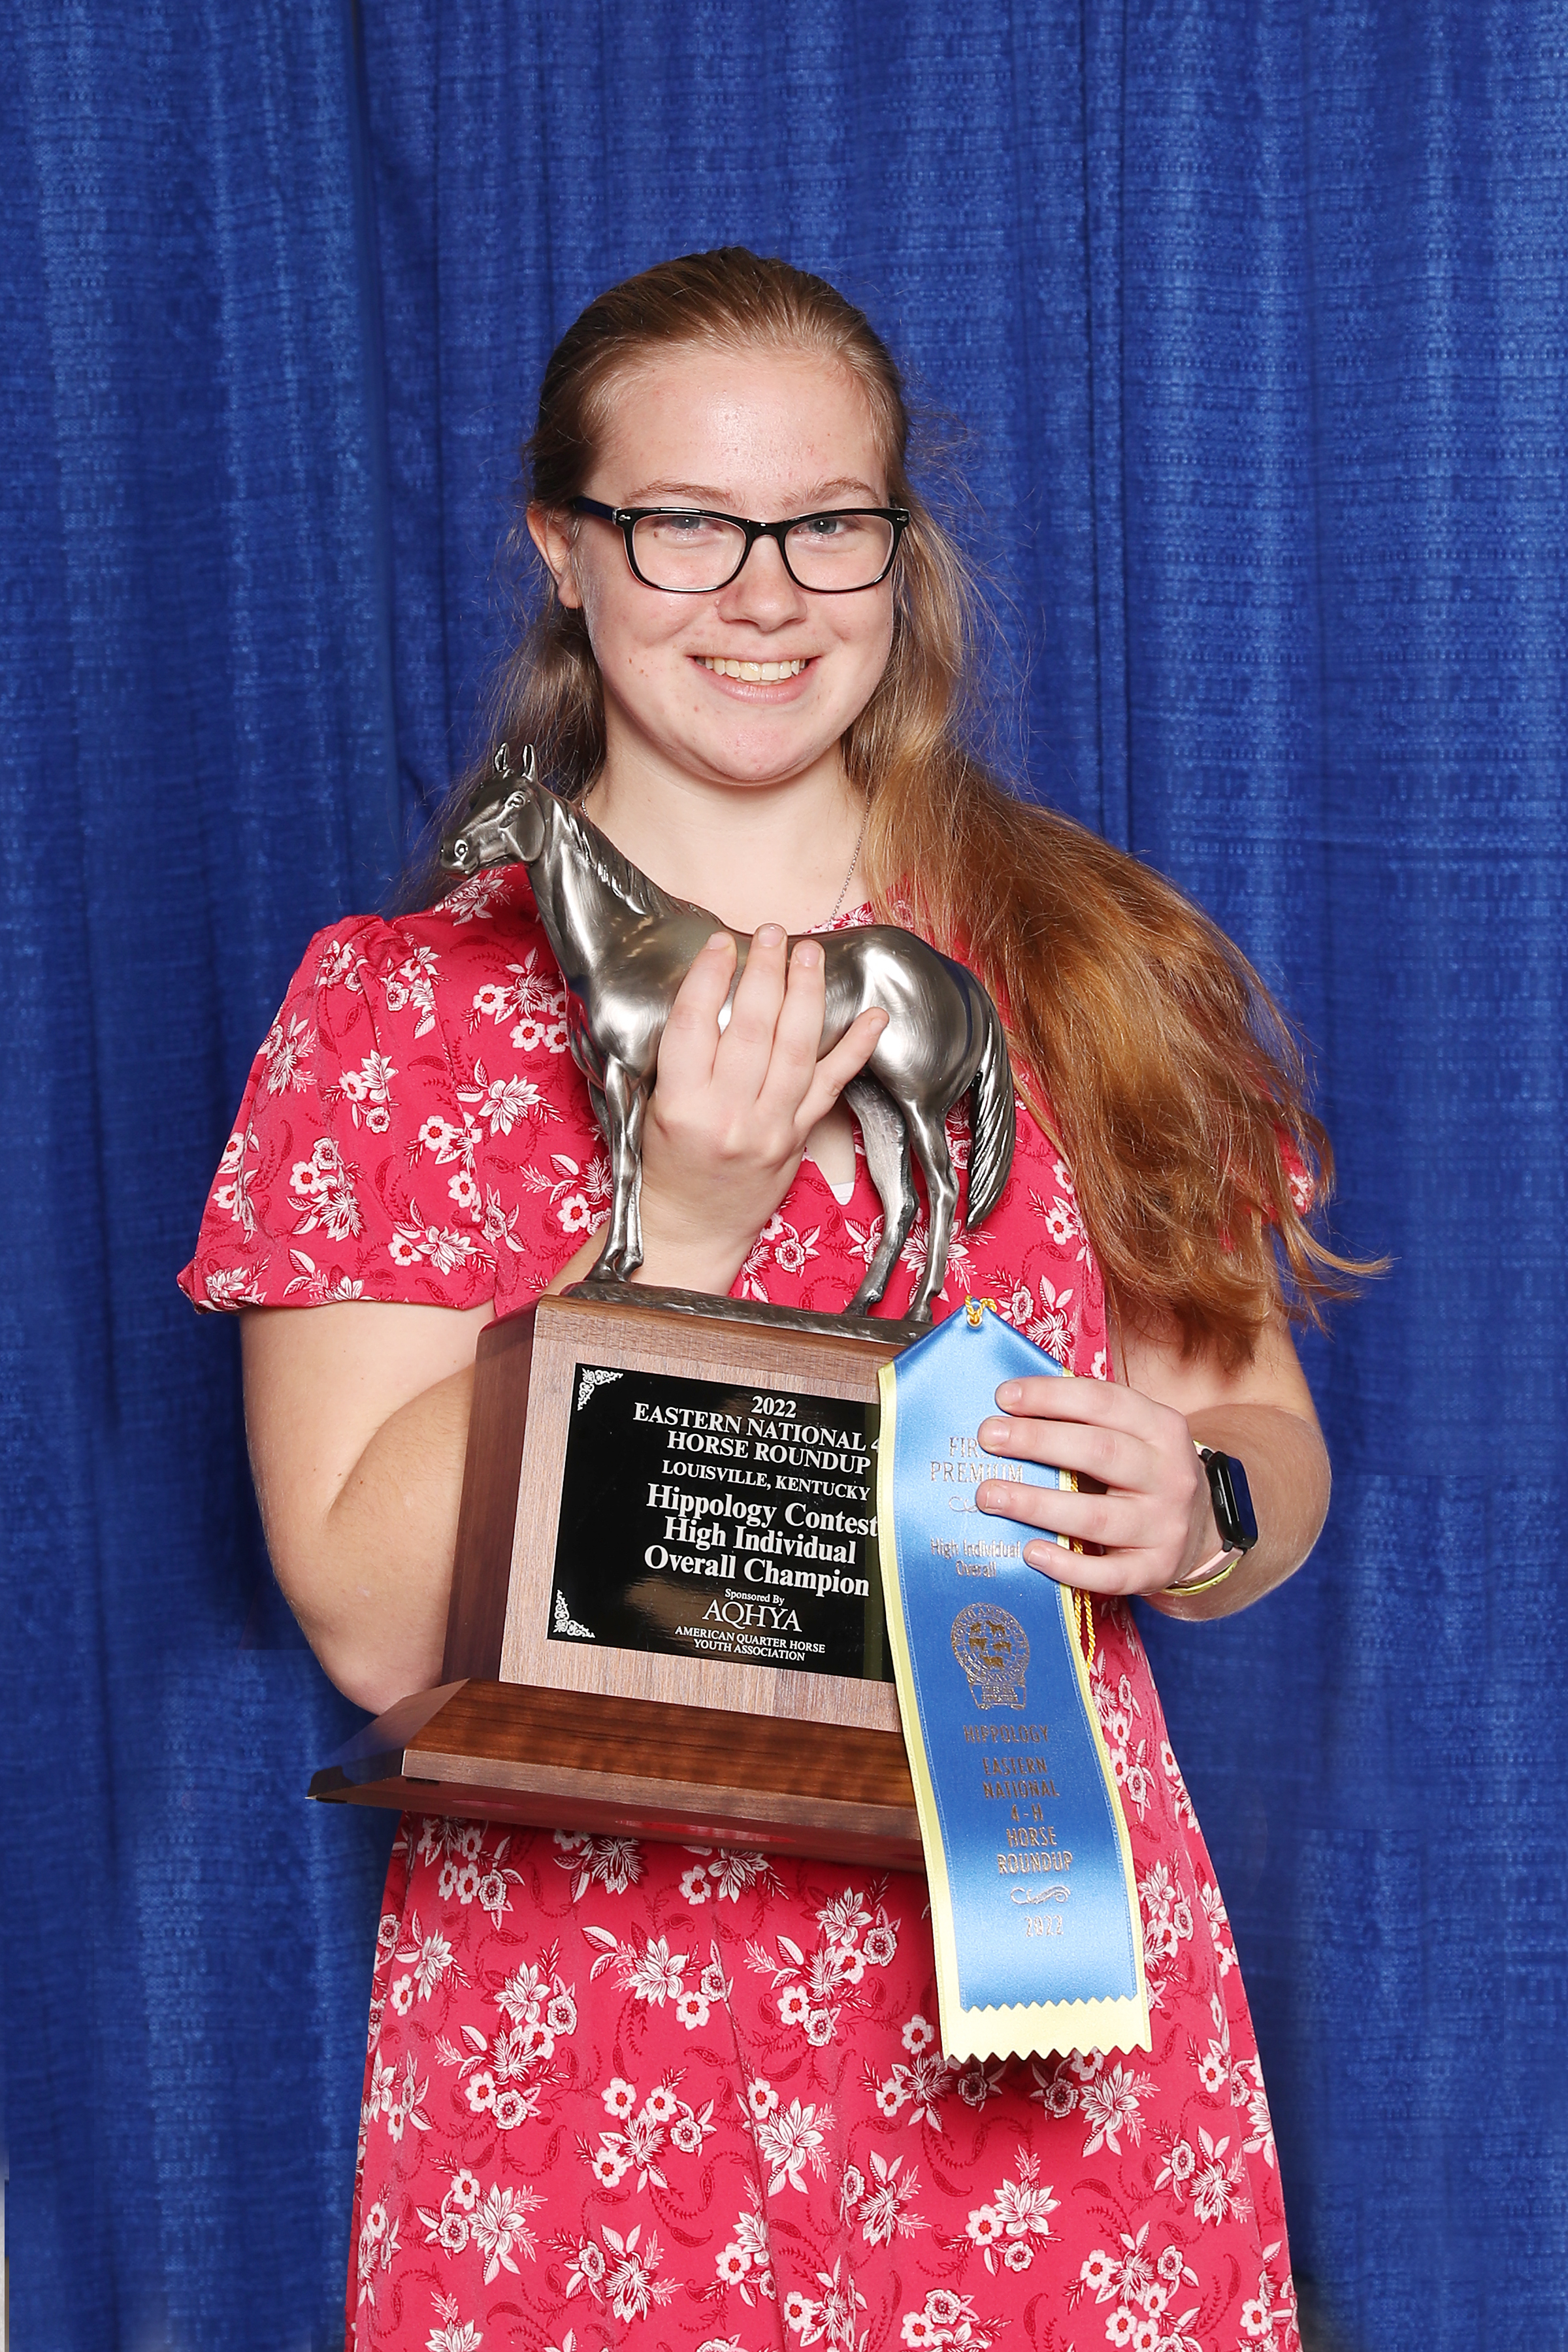 Katie Dristle wins first place in Hippology in the National 4-H Horse Roundup in Kentucky